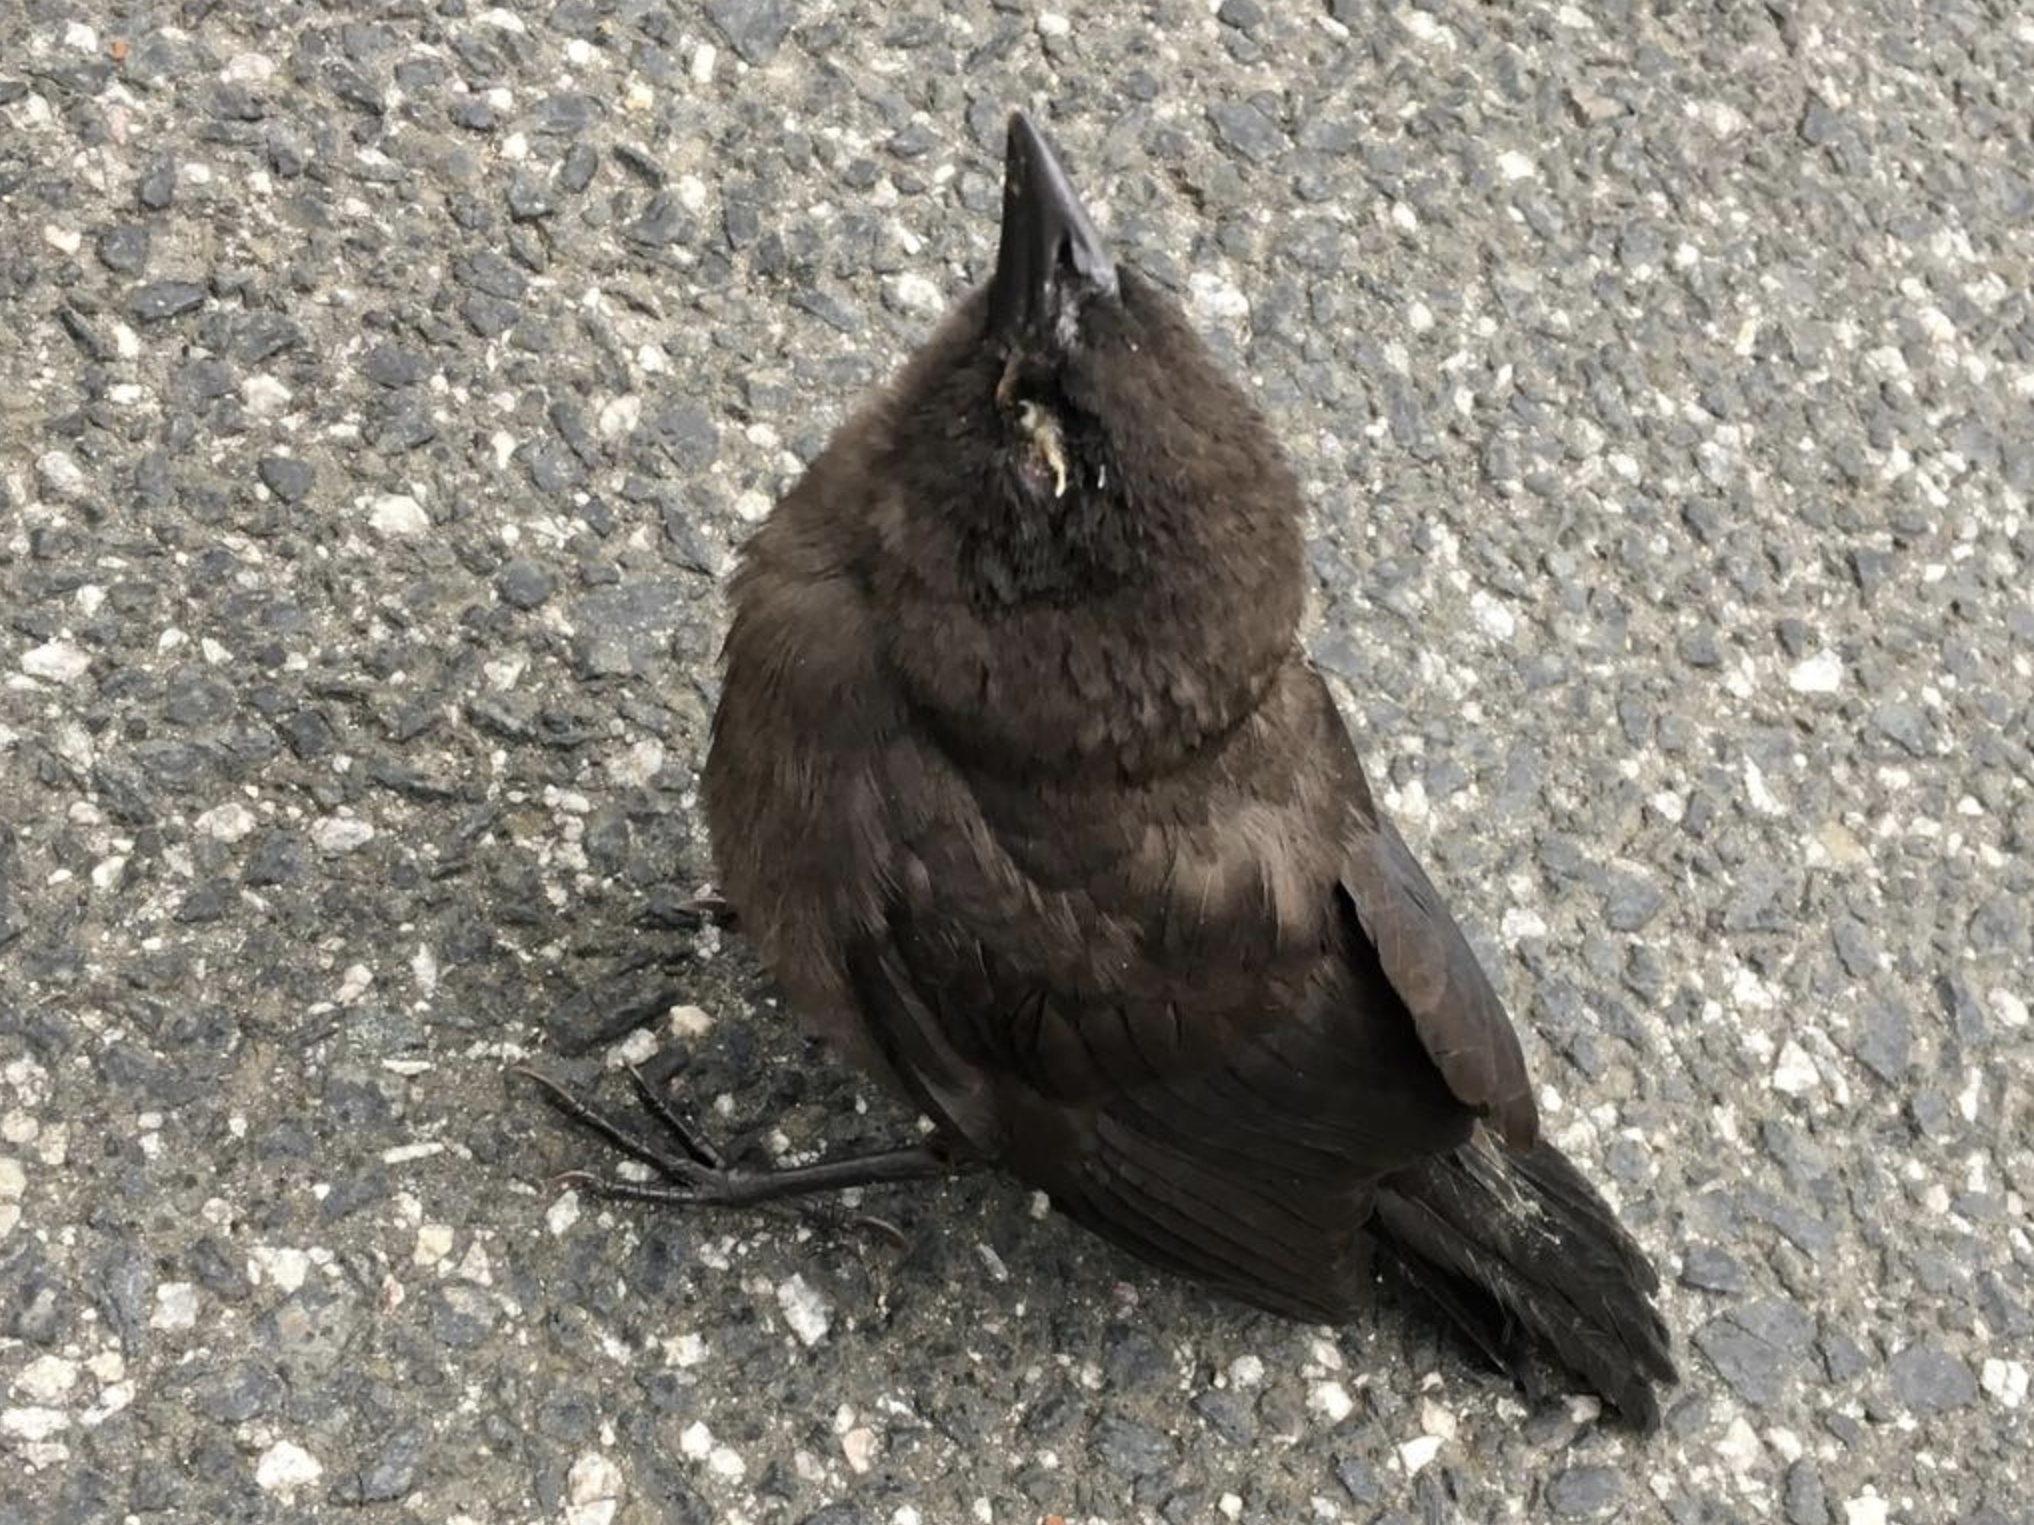 A small brown bird with a crusty layer over its eyes.